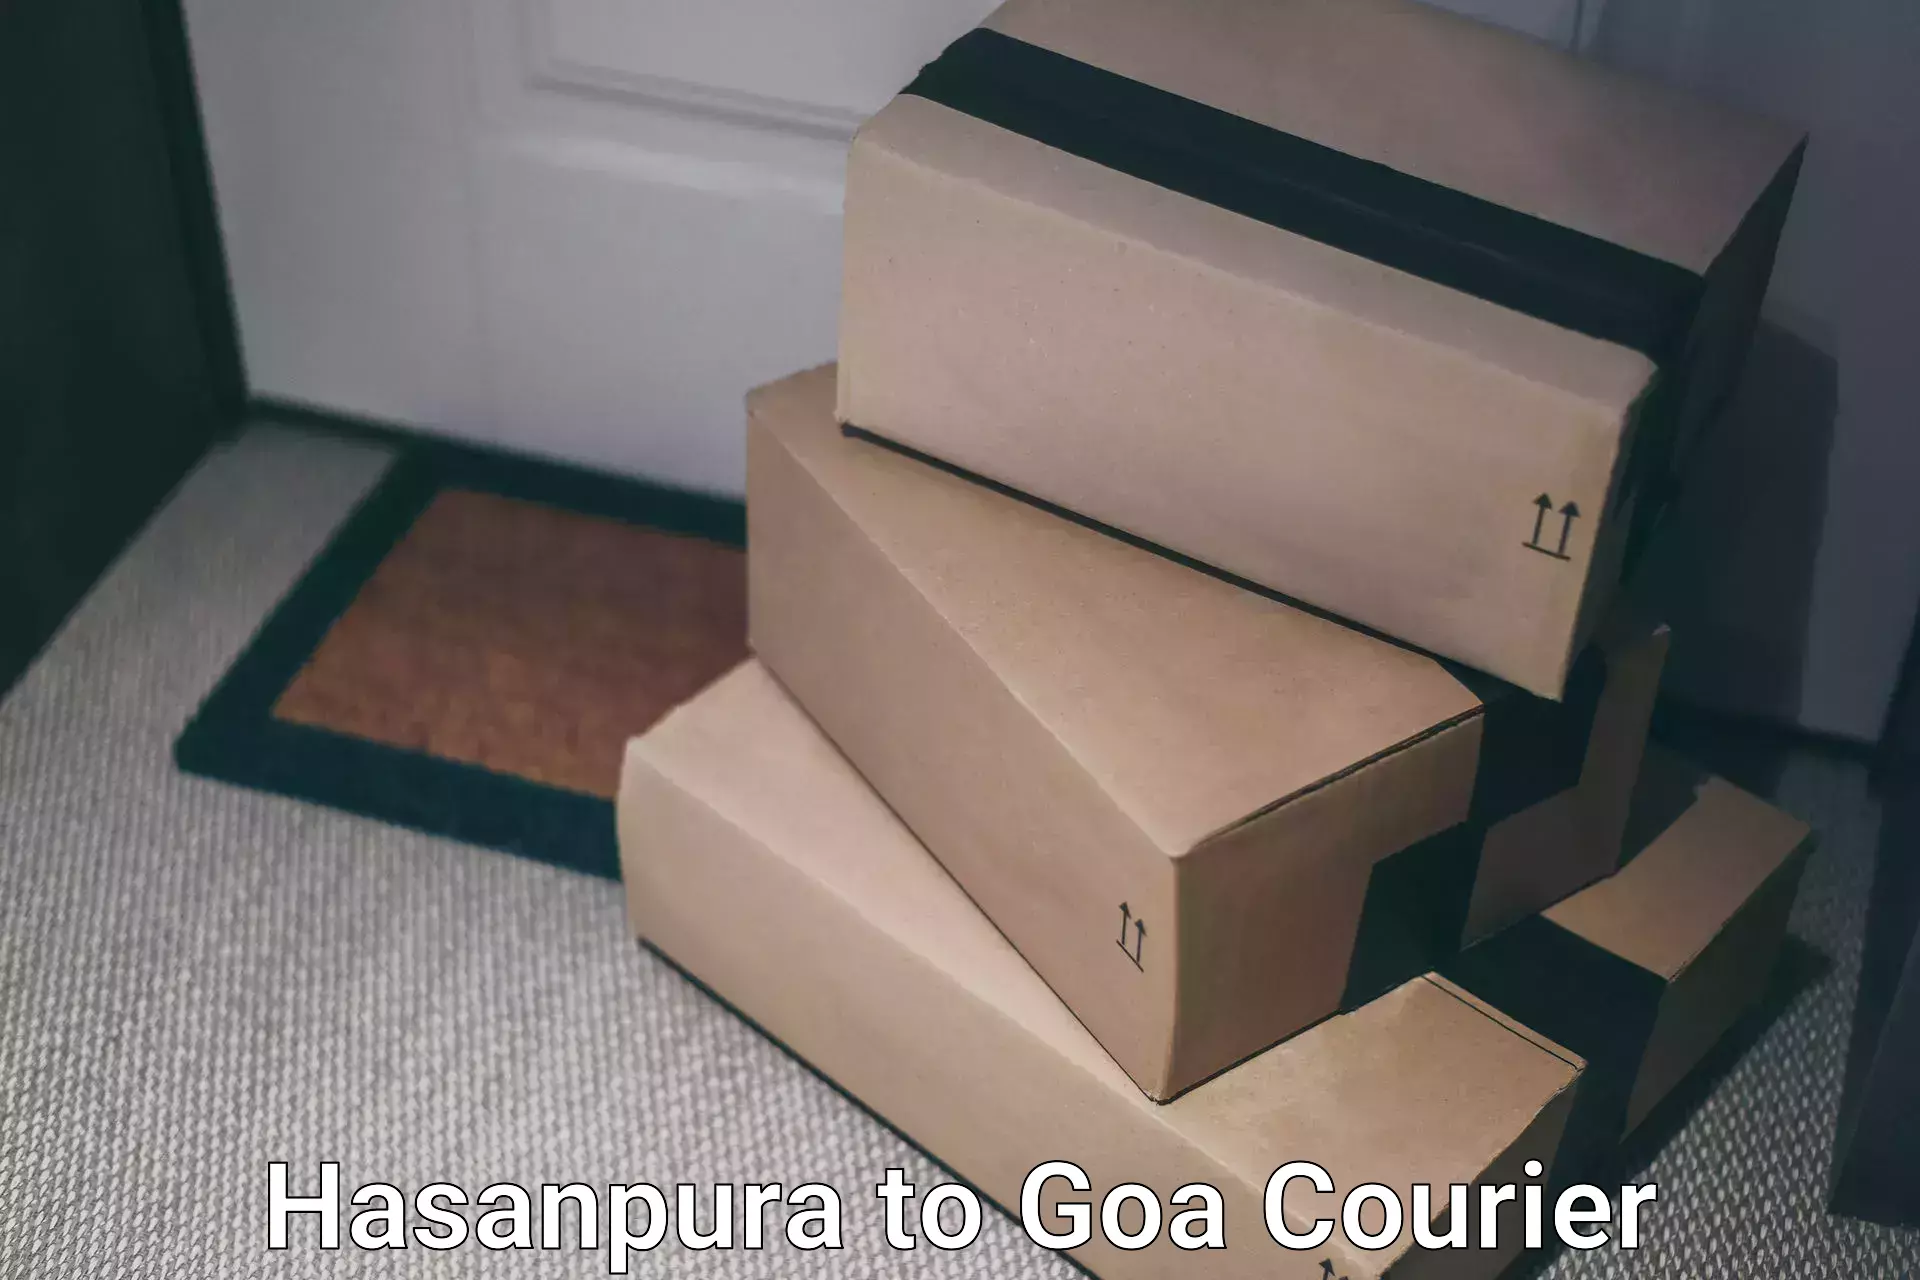 Multi-national courier services Hasanpura to Goa